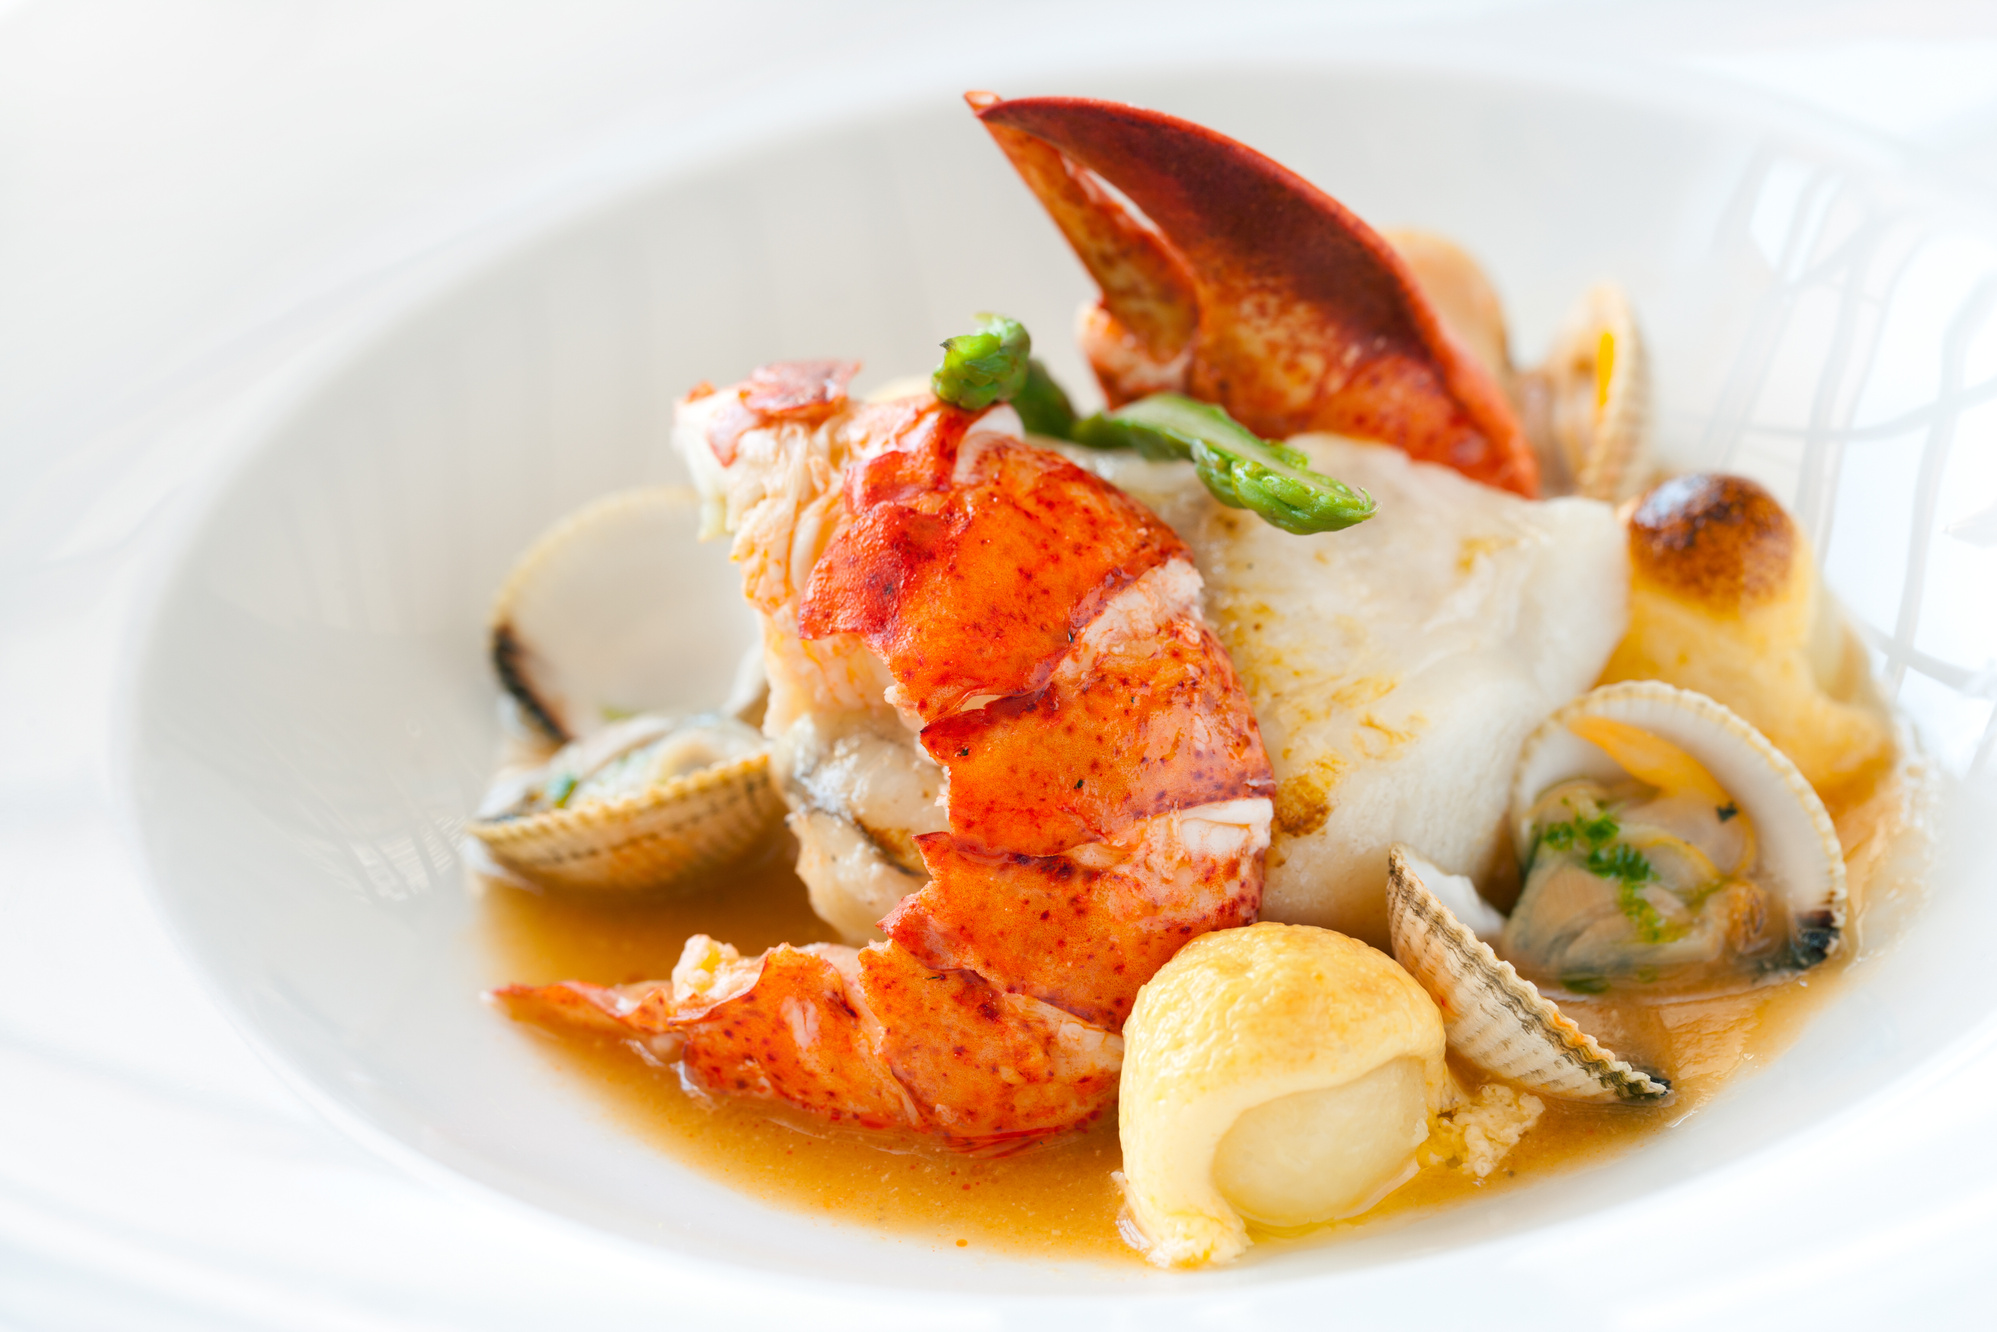 Seafood dish with lobster.